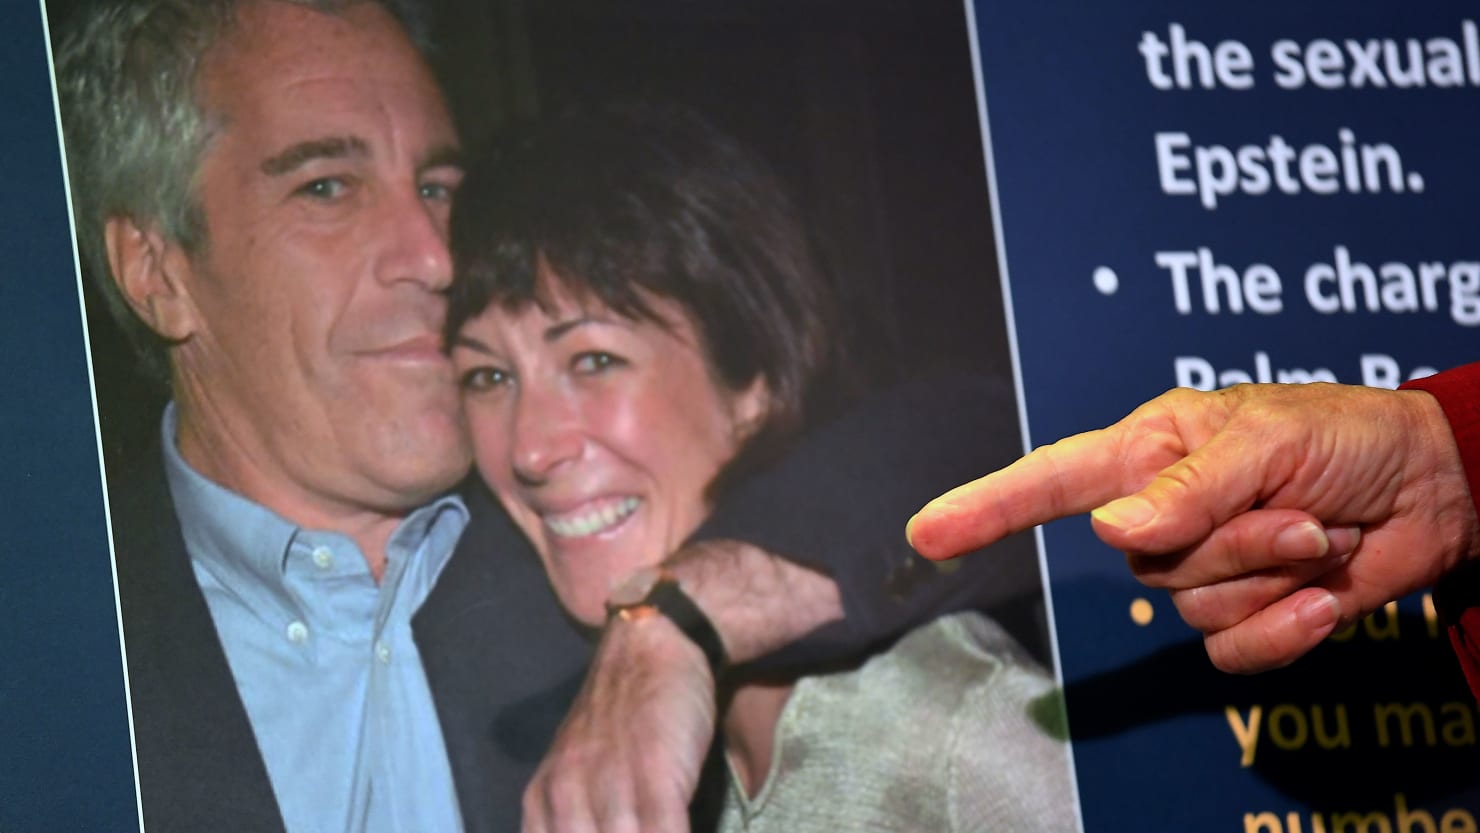 Mrs Ghislaine Maxwell, accused by Jeffrey Epstein, sells house in London to pay legal fees